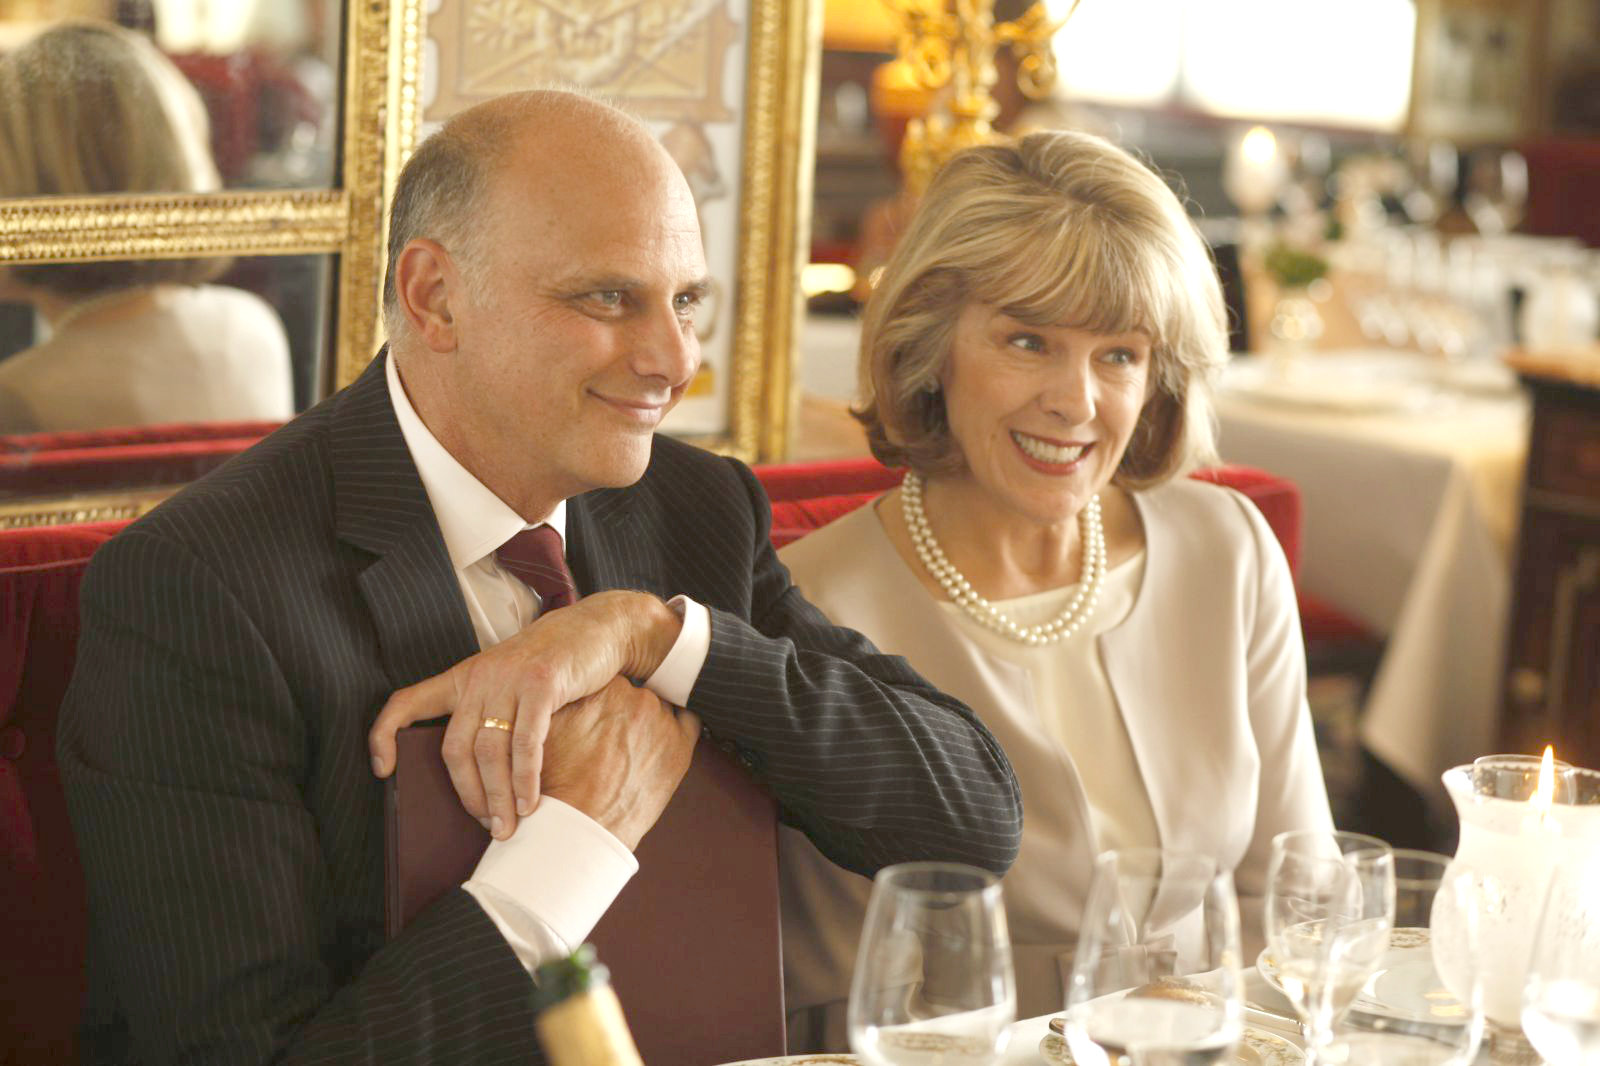 Kurt Fuller stars as John and Mimi Kennedy stars as Helen in Sony Pictures Classics' Midnight in Paris (2011). Photo credit by Roger Arpajou.